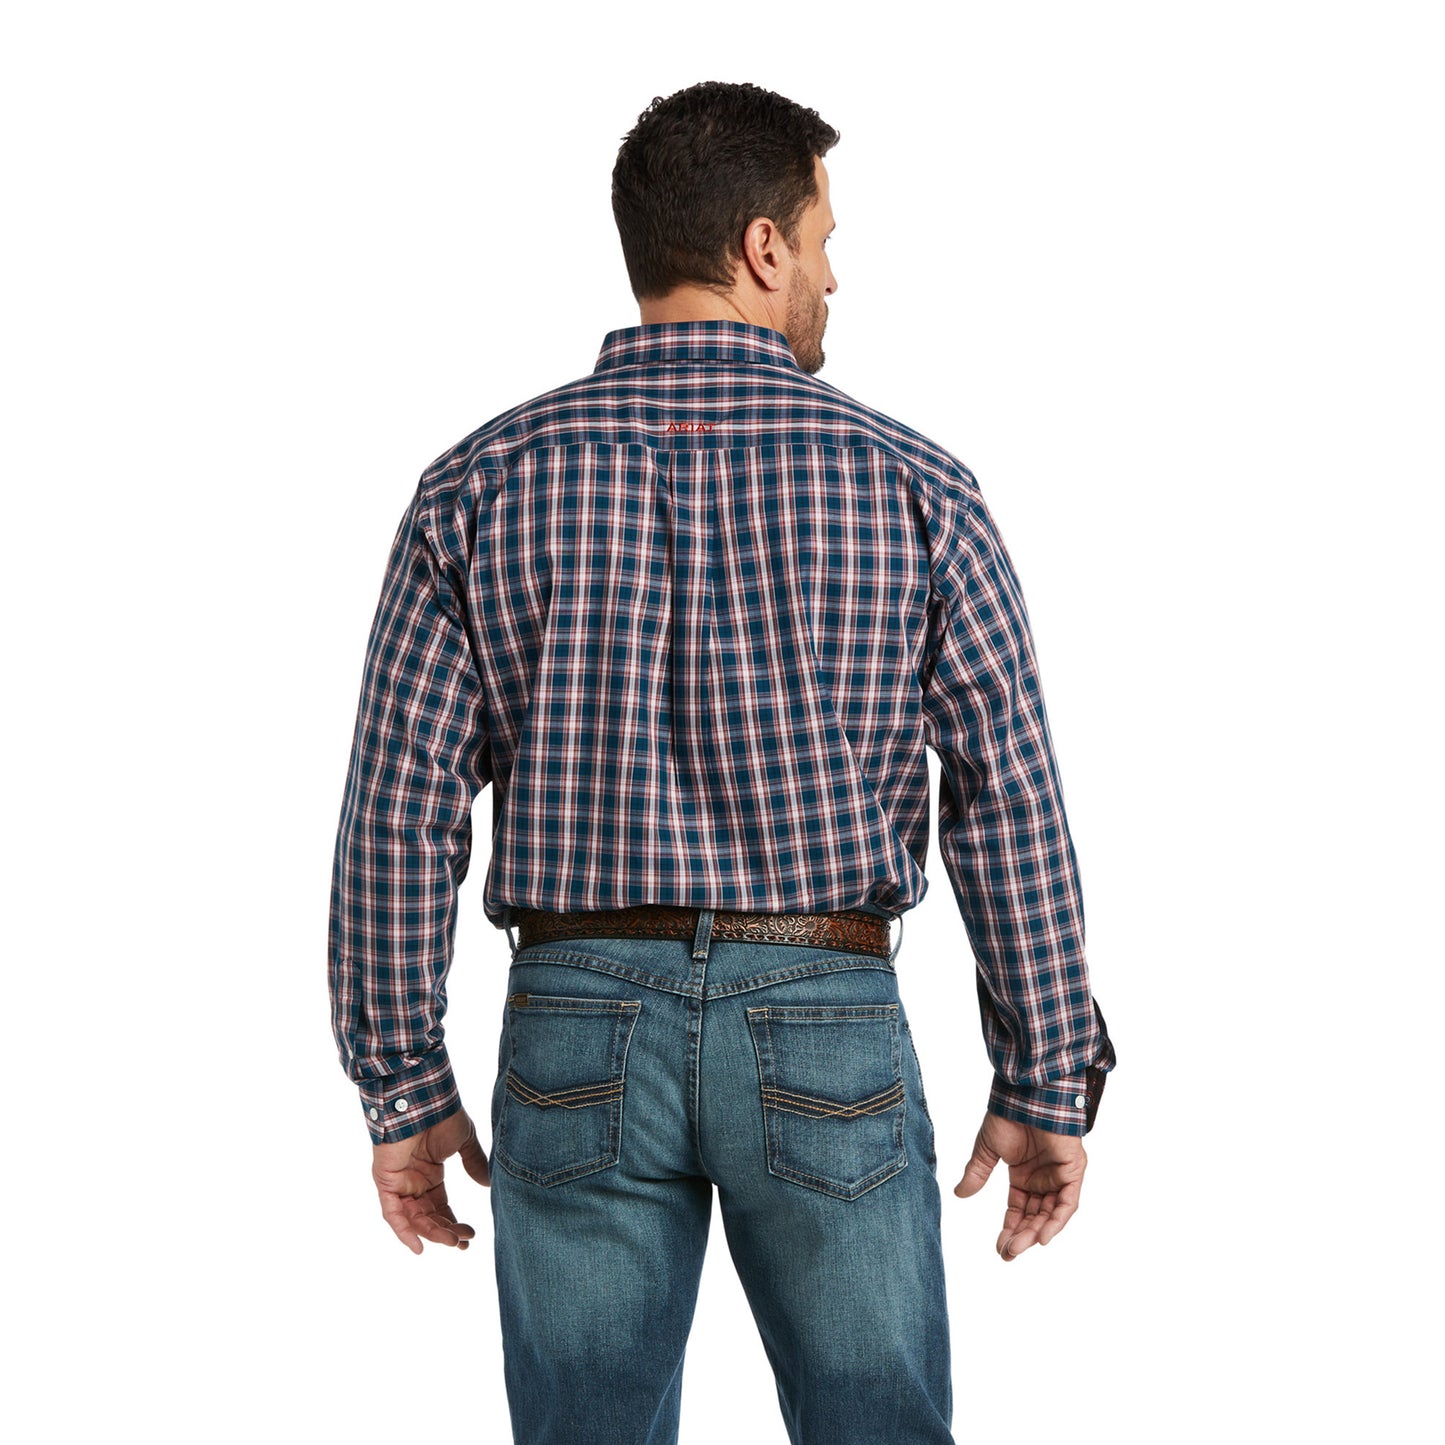 Ariat Wrinkle Free Vero Button Up